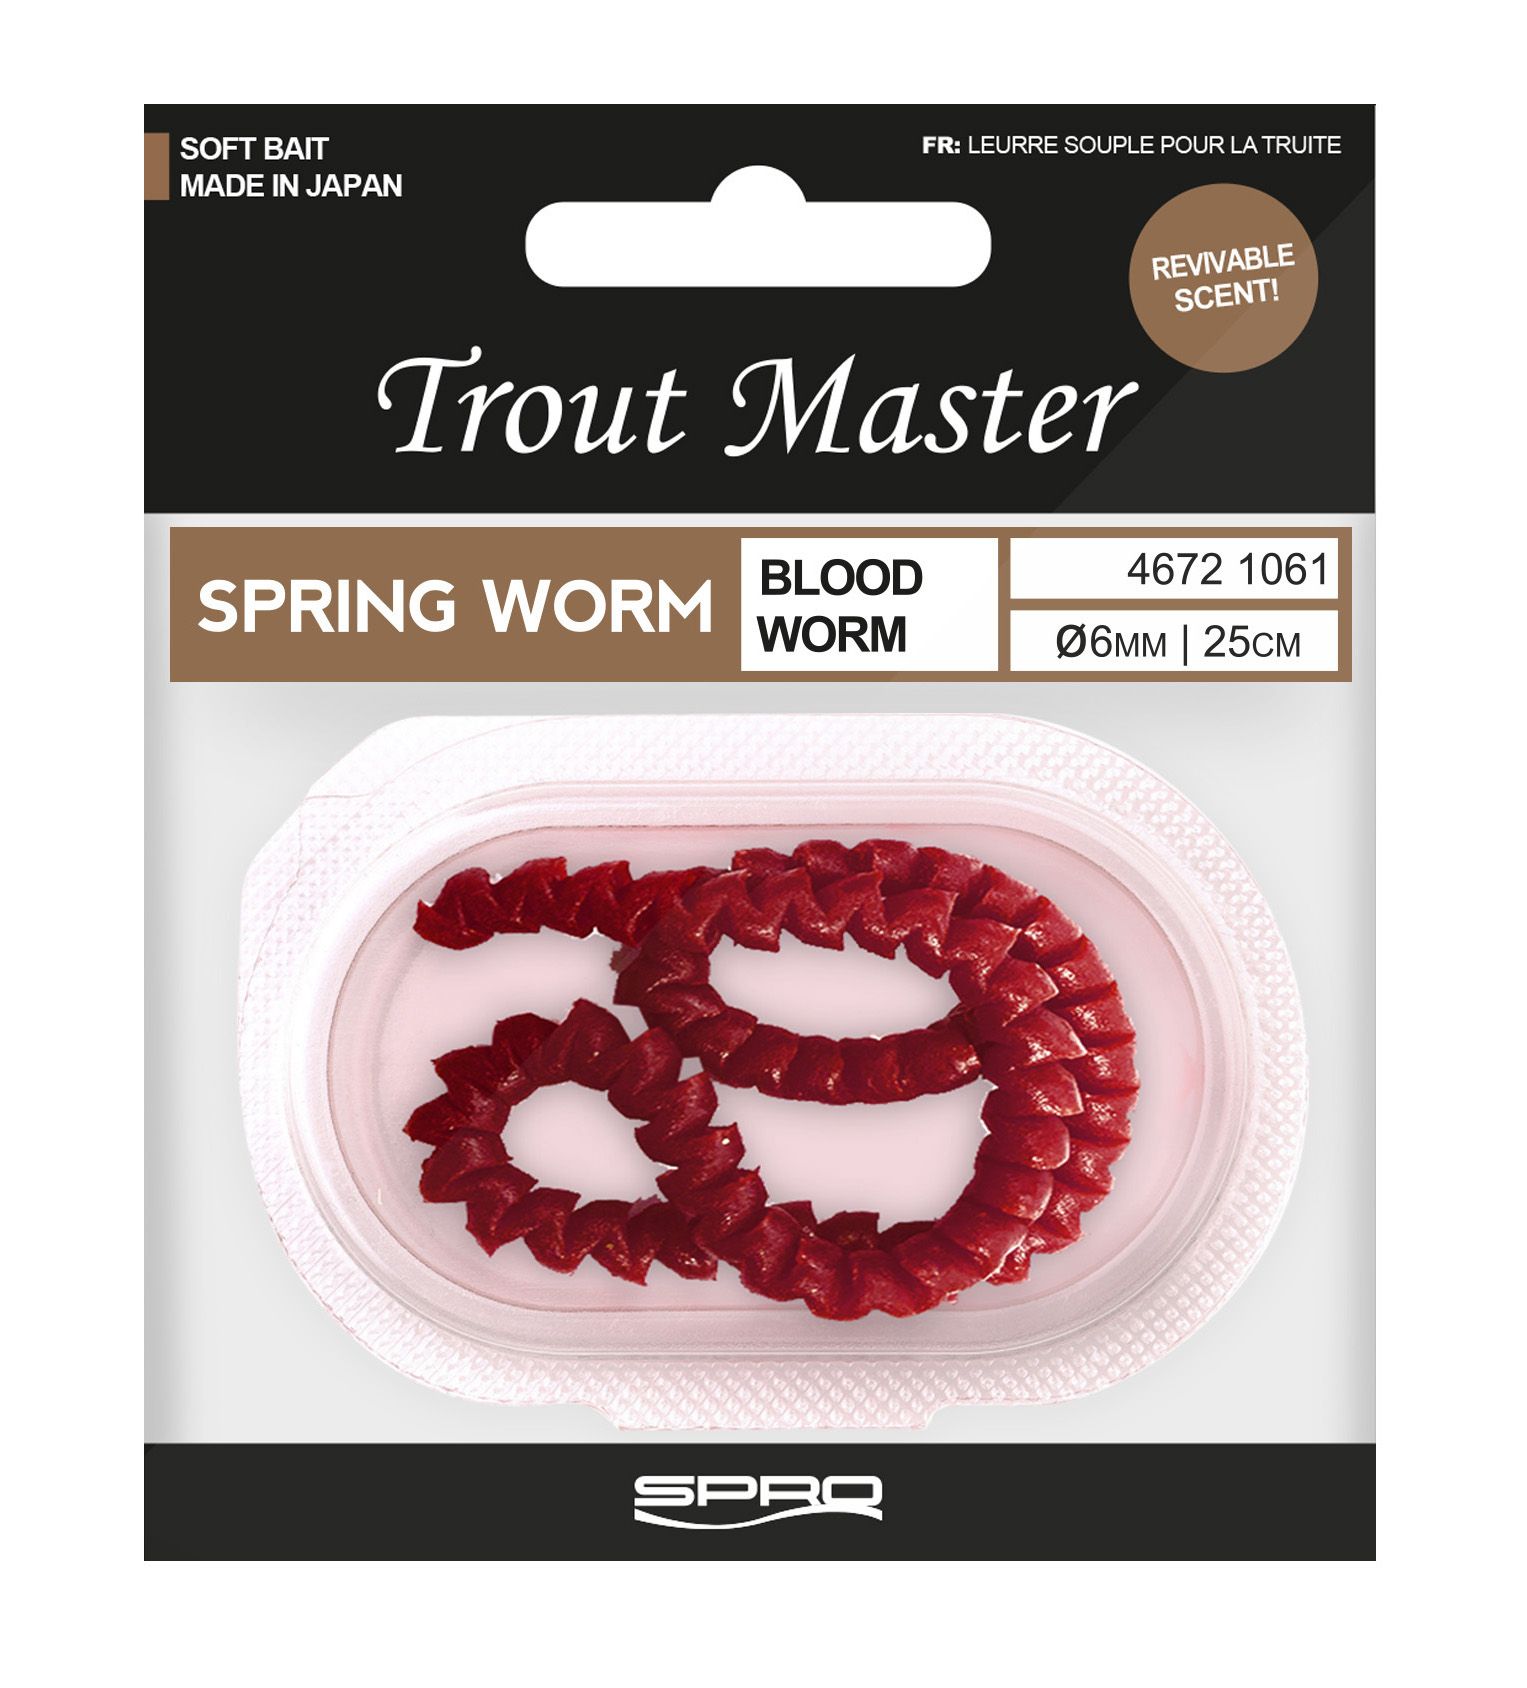 Trout Master Spring Worm 6mm 25cm